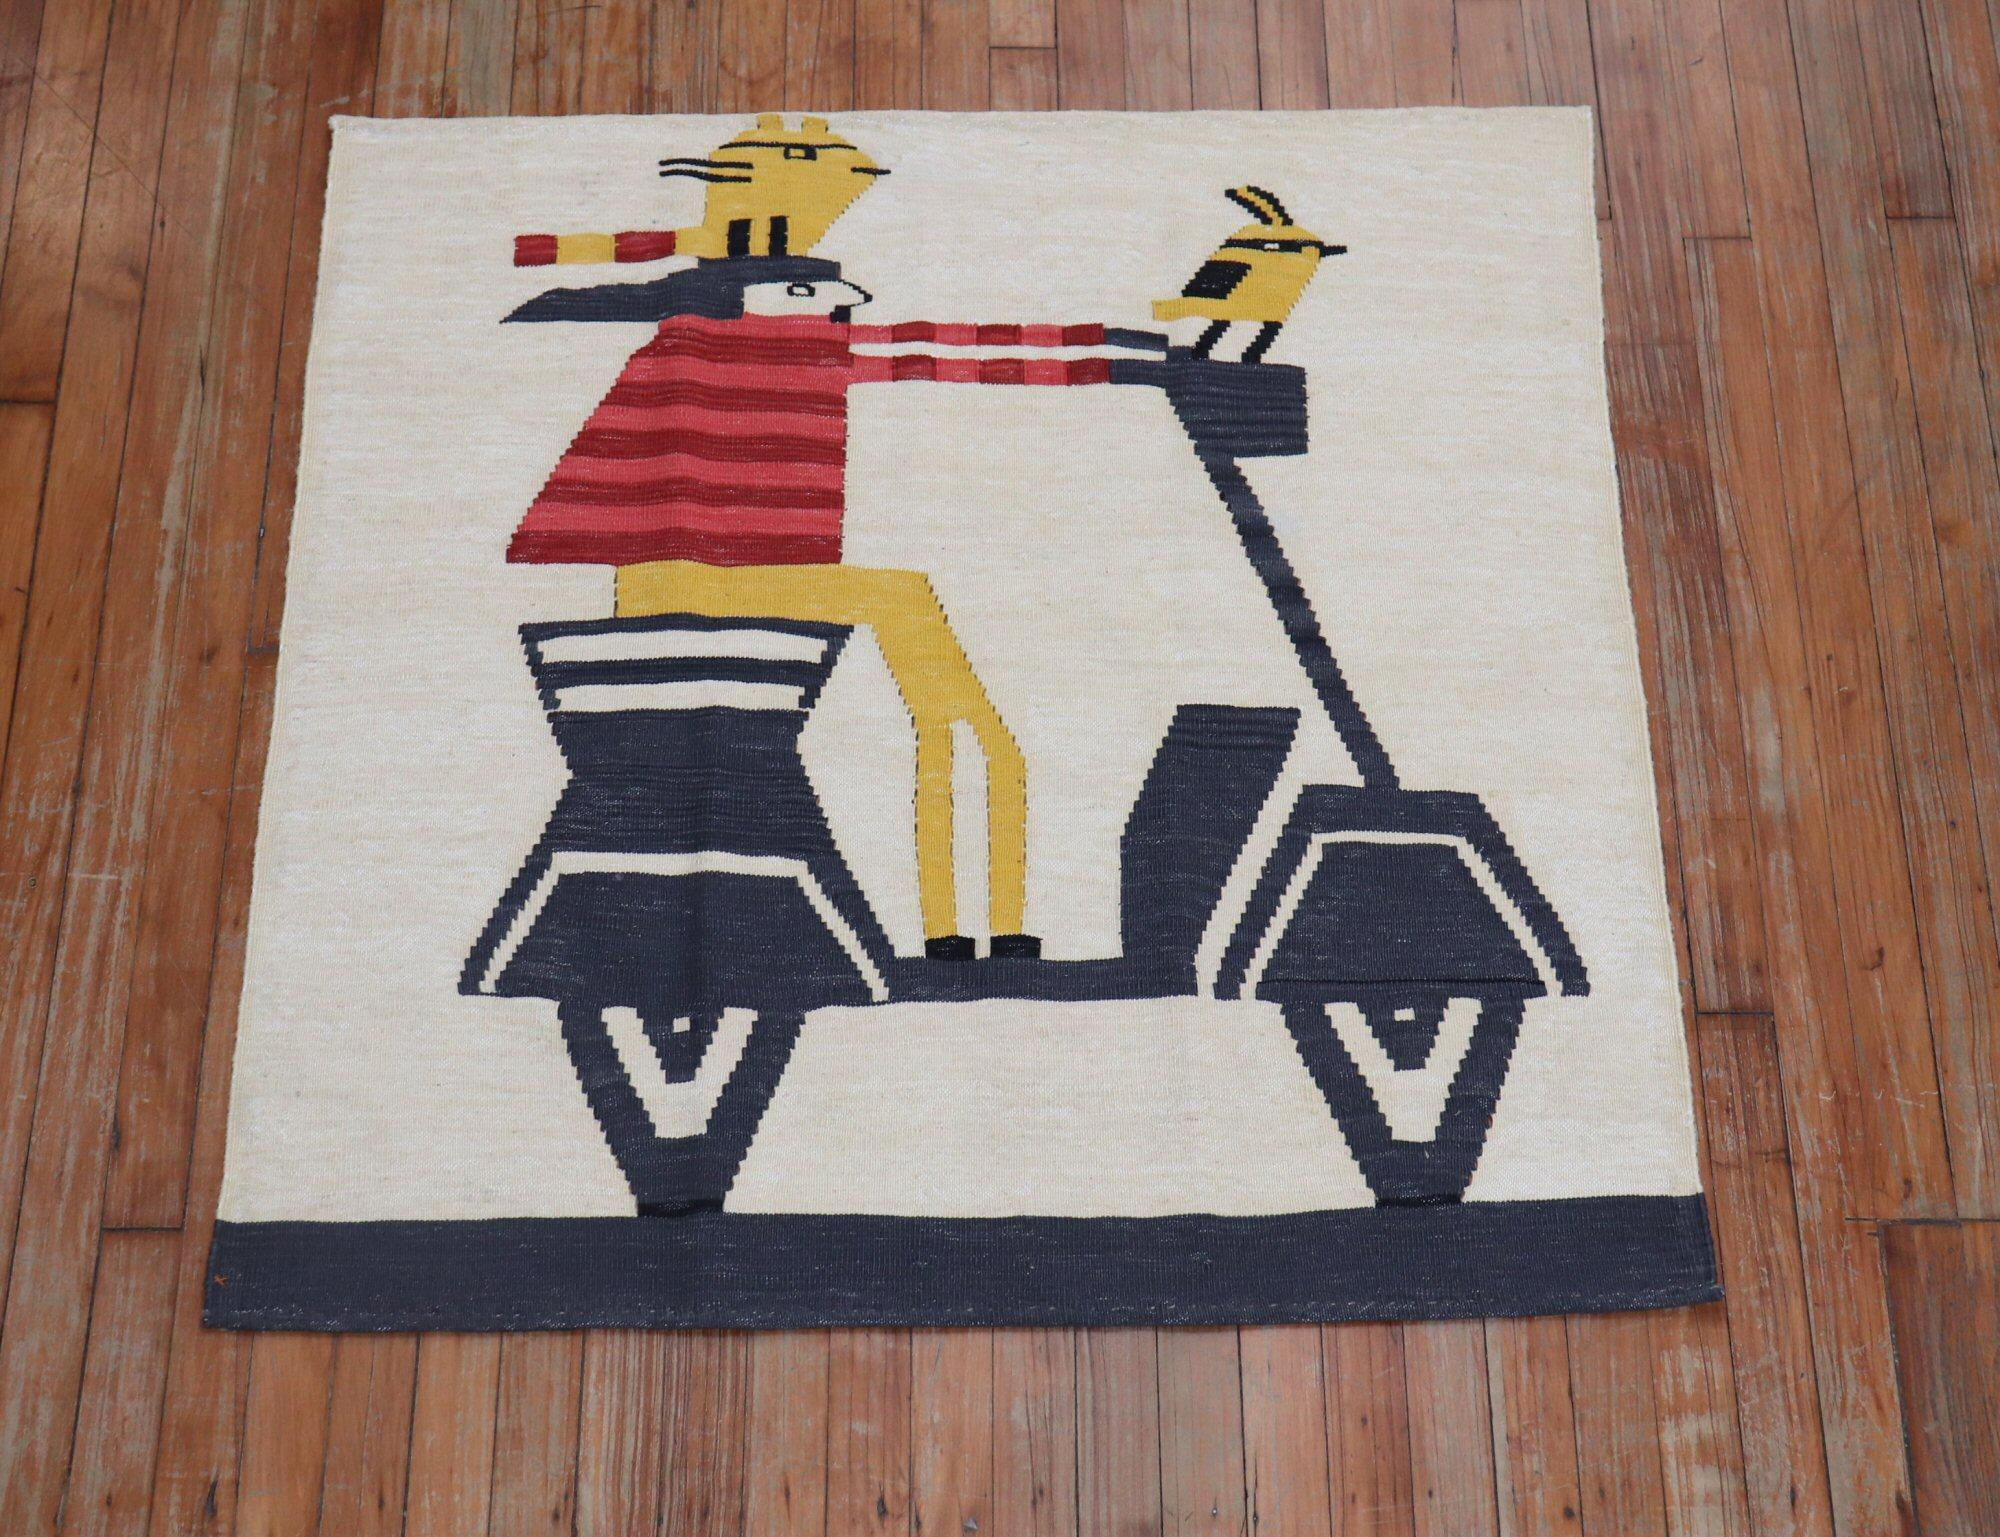 Square scatter size Persian Kilim from the 20th century with a man riding on his scooter with 2 birds. Looks like they are going for a thrill ride!! Yeeehaw!!!
This was originally belonging to a private Persian collector who requested to make a